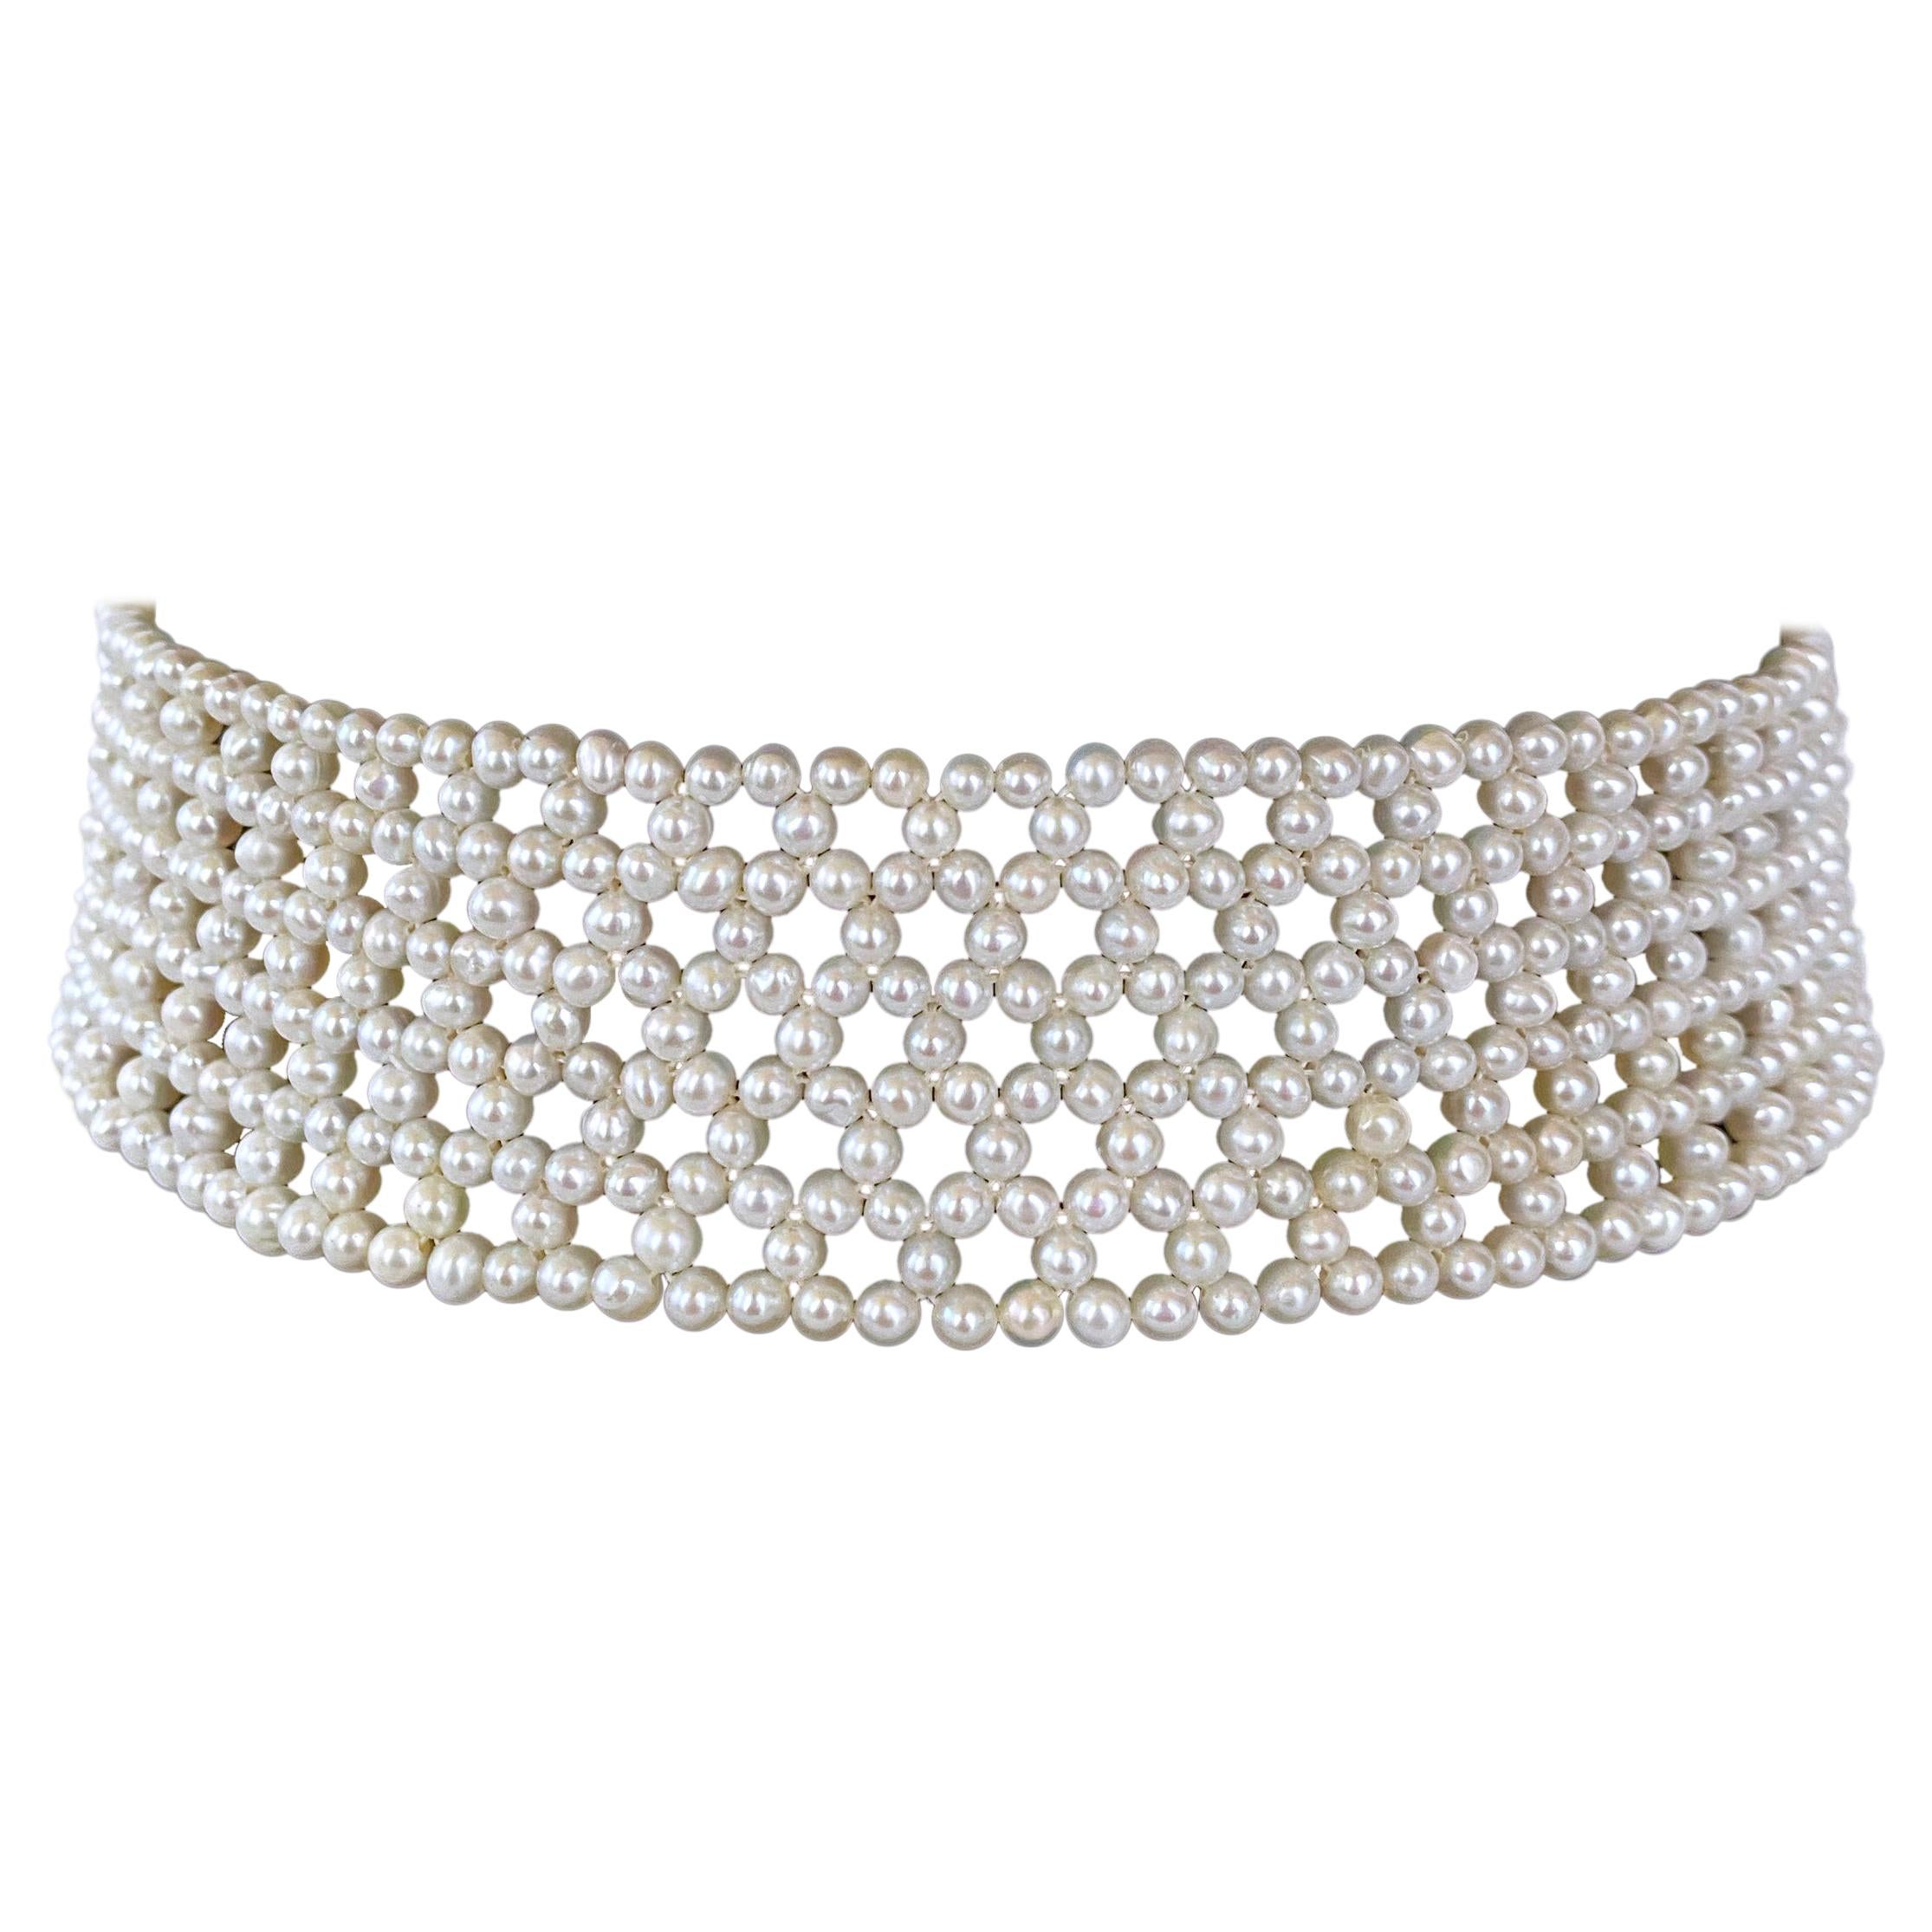 Marina J. Woven Lace Pearl Choker with Rhodium Plated Silver Clasp